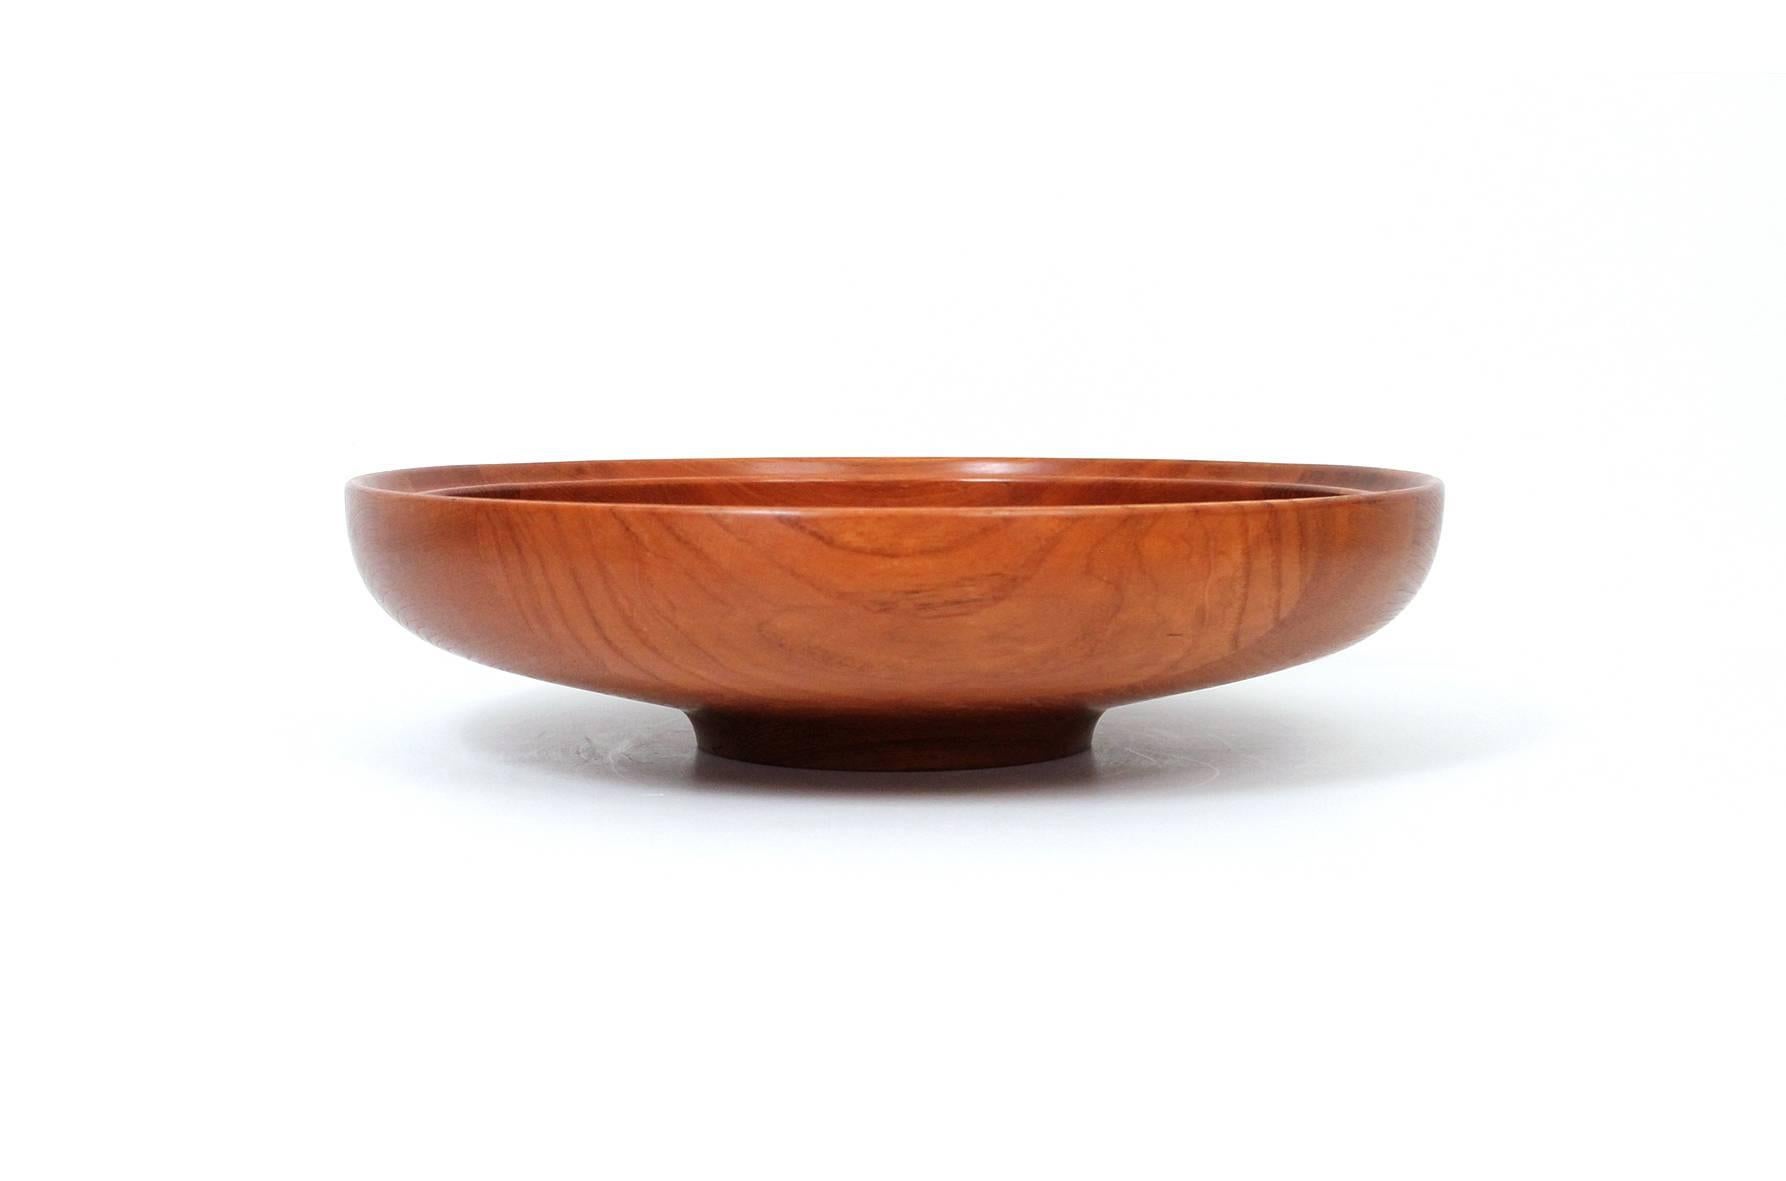 Large-scaled teak serving bowl designed by Henning Koppel for the Danish company Georg Jensen. Beautifully figured and grained solid teak. Branded to underside along with original retailer's label.